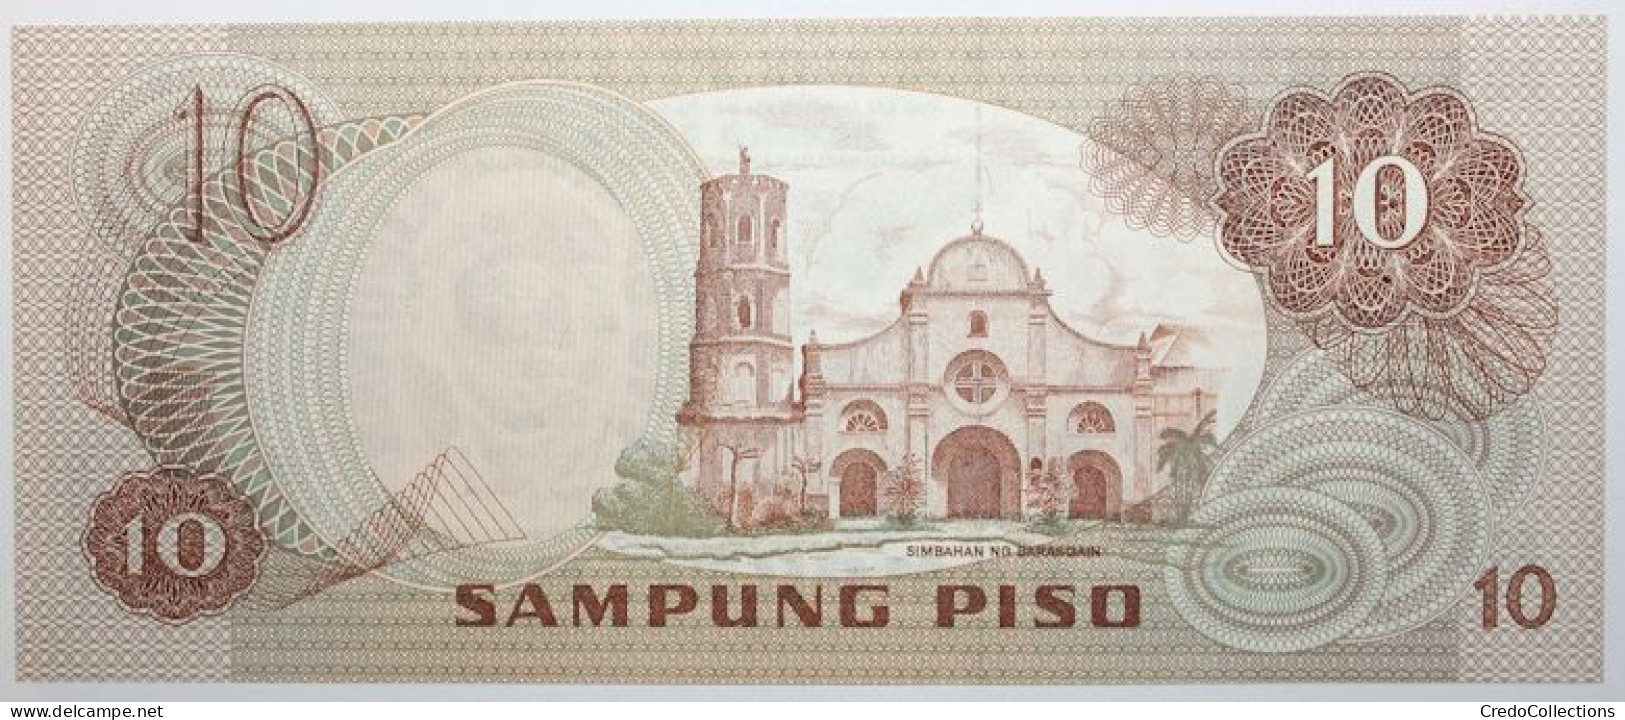 Philippines - 10 Piso - 1981 - PICK 167a - NEUF - Philippines